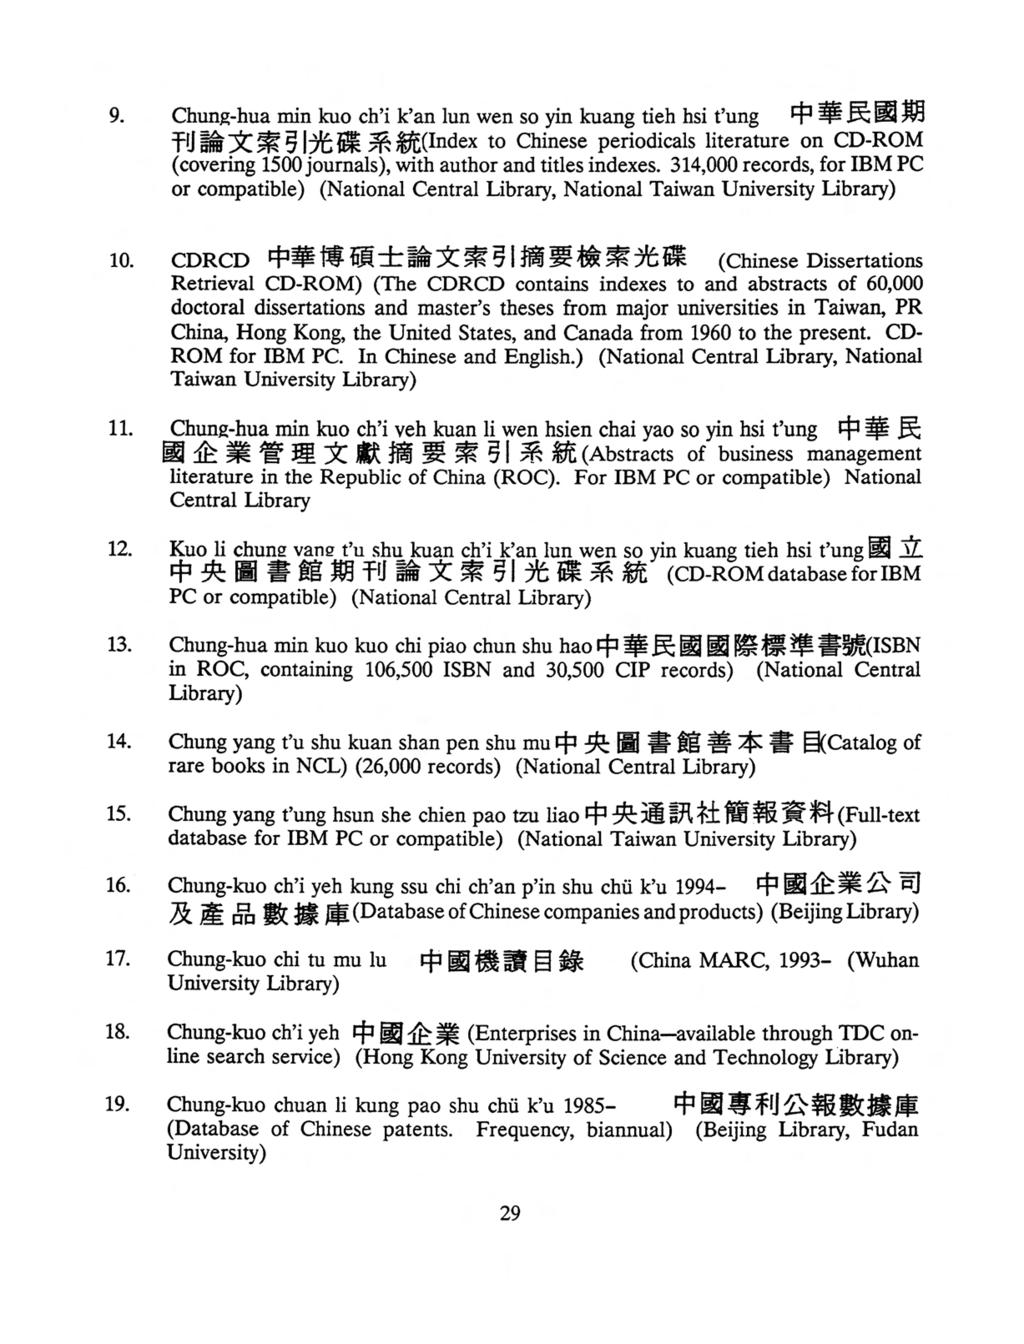 9. Chung-hua min kuo ch'i k'an lun wen so yin kuang tieh hsi t'ung T f Jfffl3t^?l:)fcSI ^S ( Index to Chinese periodicals literature on CD-ROM (covering 1500 journals), with author and titles indexes.